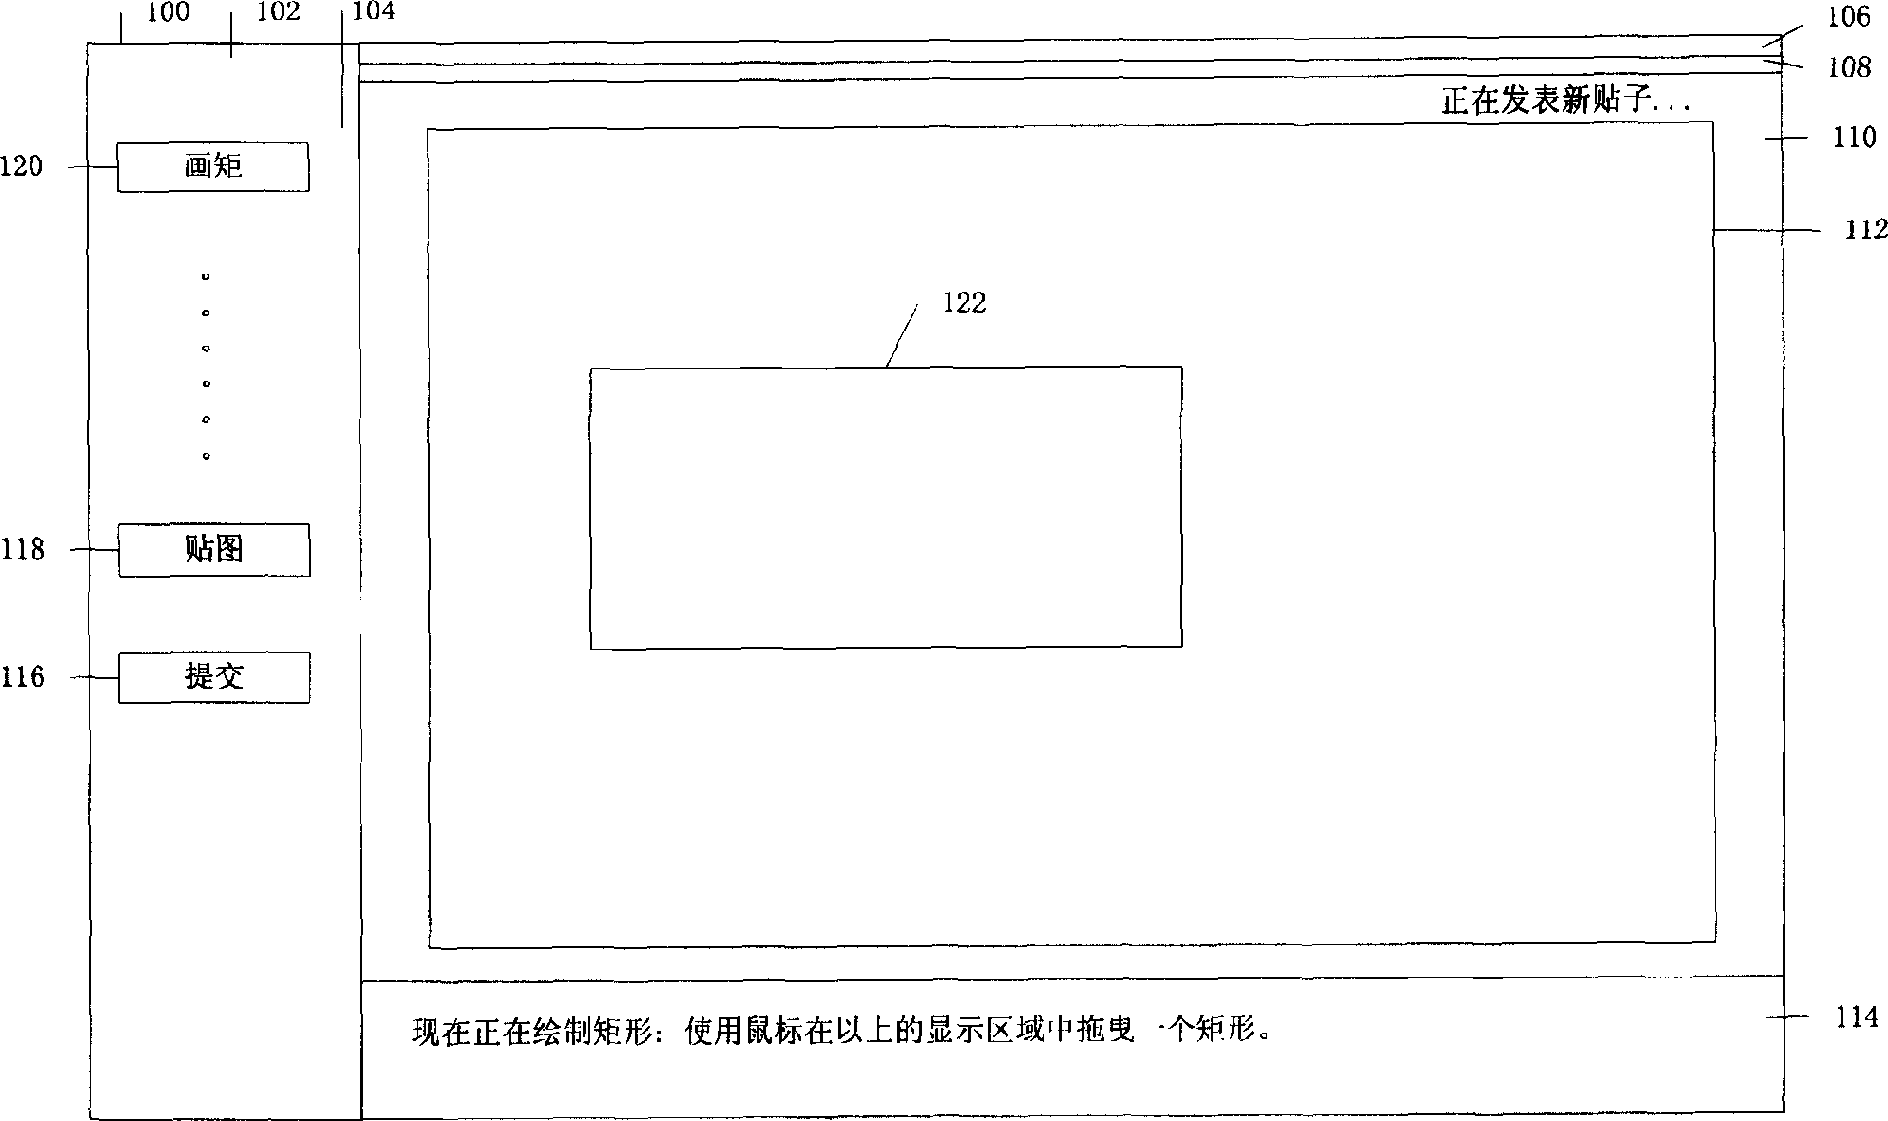 Method for drawing on or sending to bulletins containing graphics bulletin boards